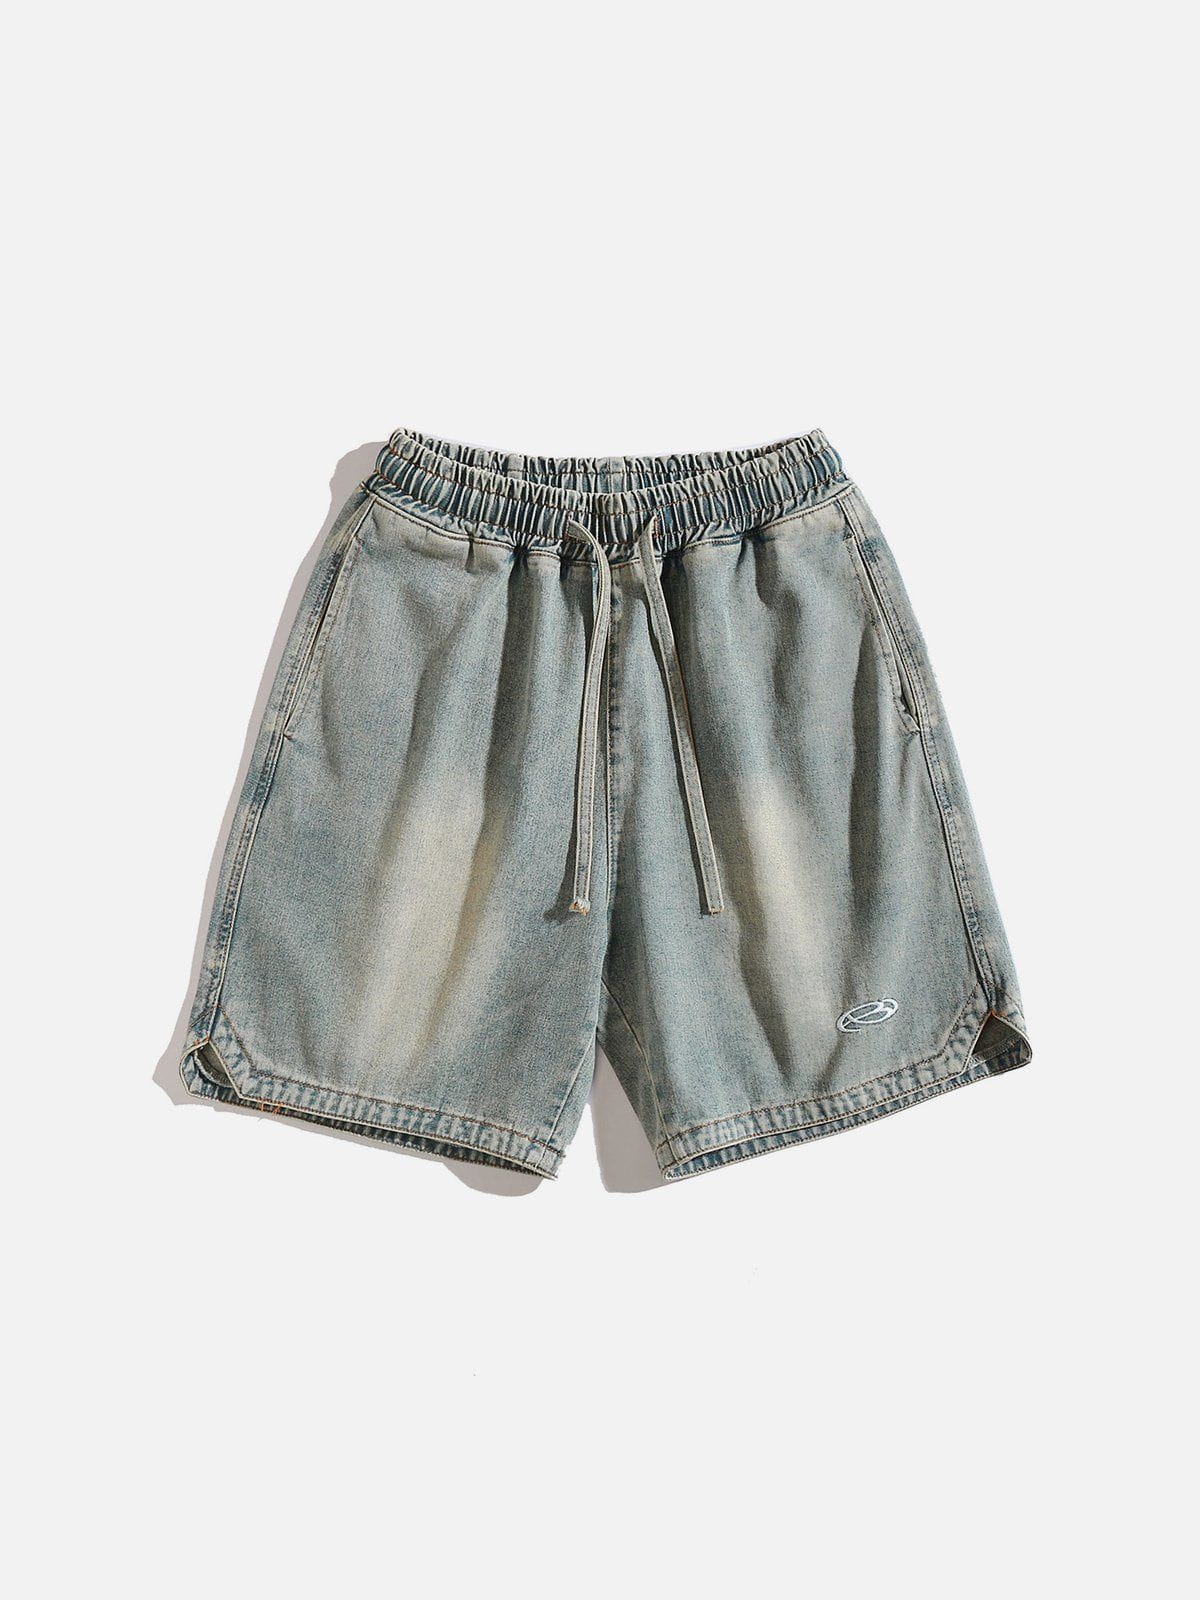 Aelfric Eden Washed Embroidery Jorts